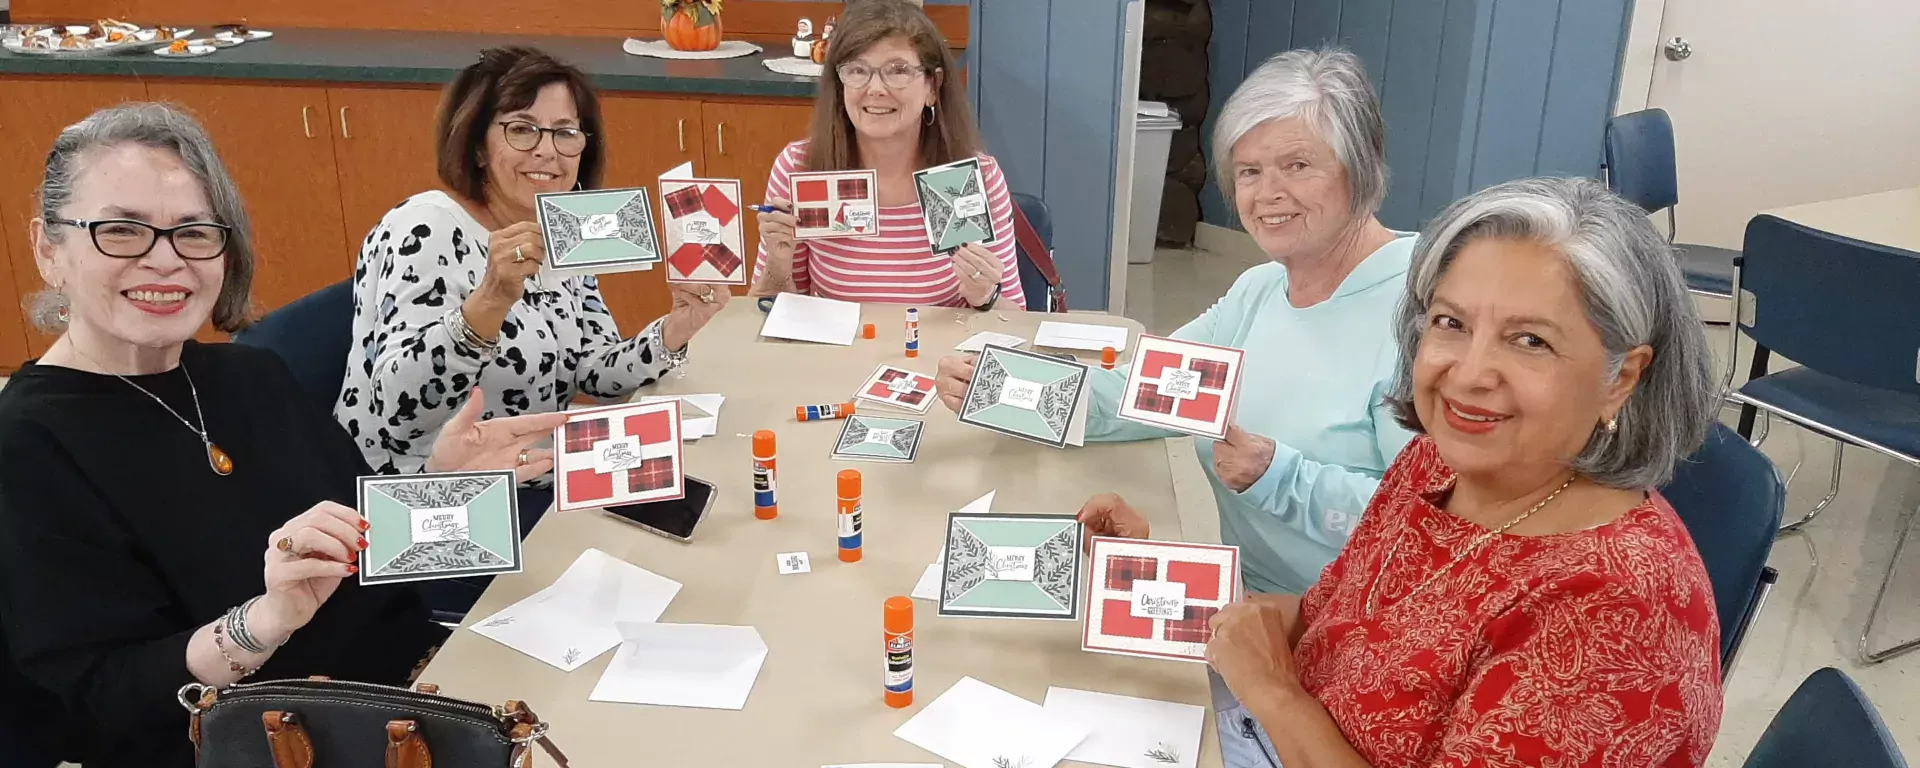 Image of a group of women holding up the holiday cards they decorated at the Log Cabin Senior Center at Langford Park in Jensen Beach, FL.